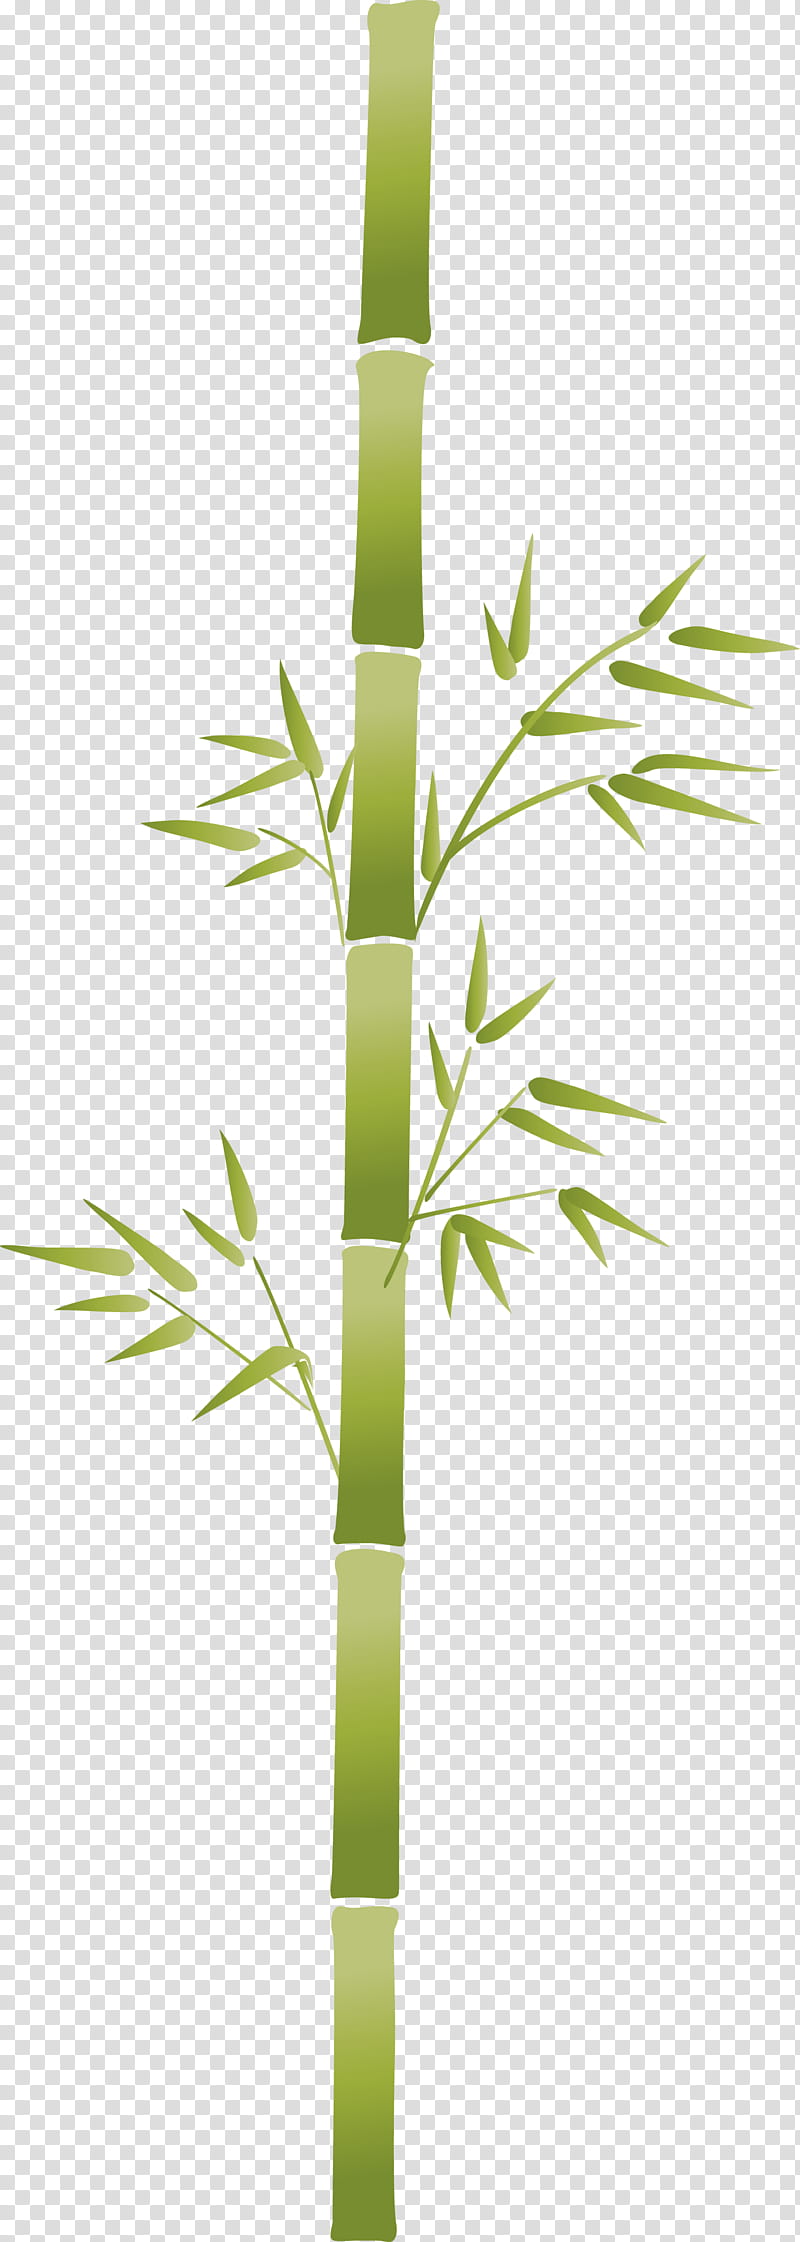 bamboo leaf, Plant Stem, Flower, Tree, Grass Family, Terrestrial Plant, Branch, Houseplant transparent background PNG clipart